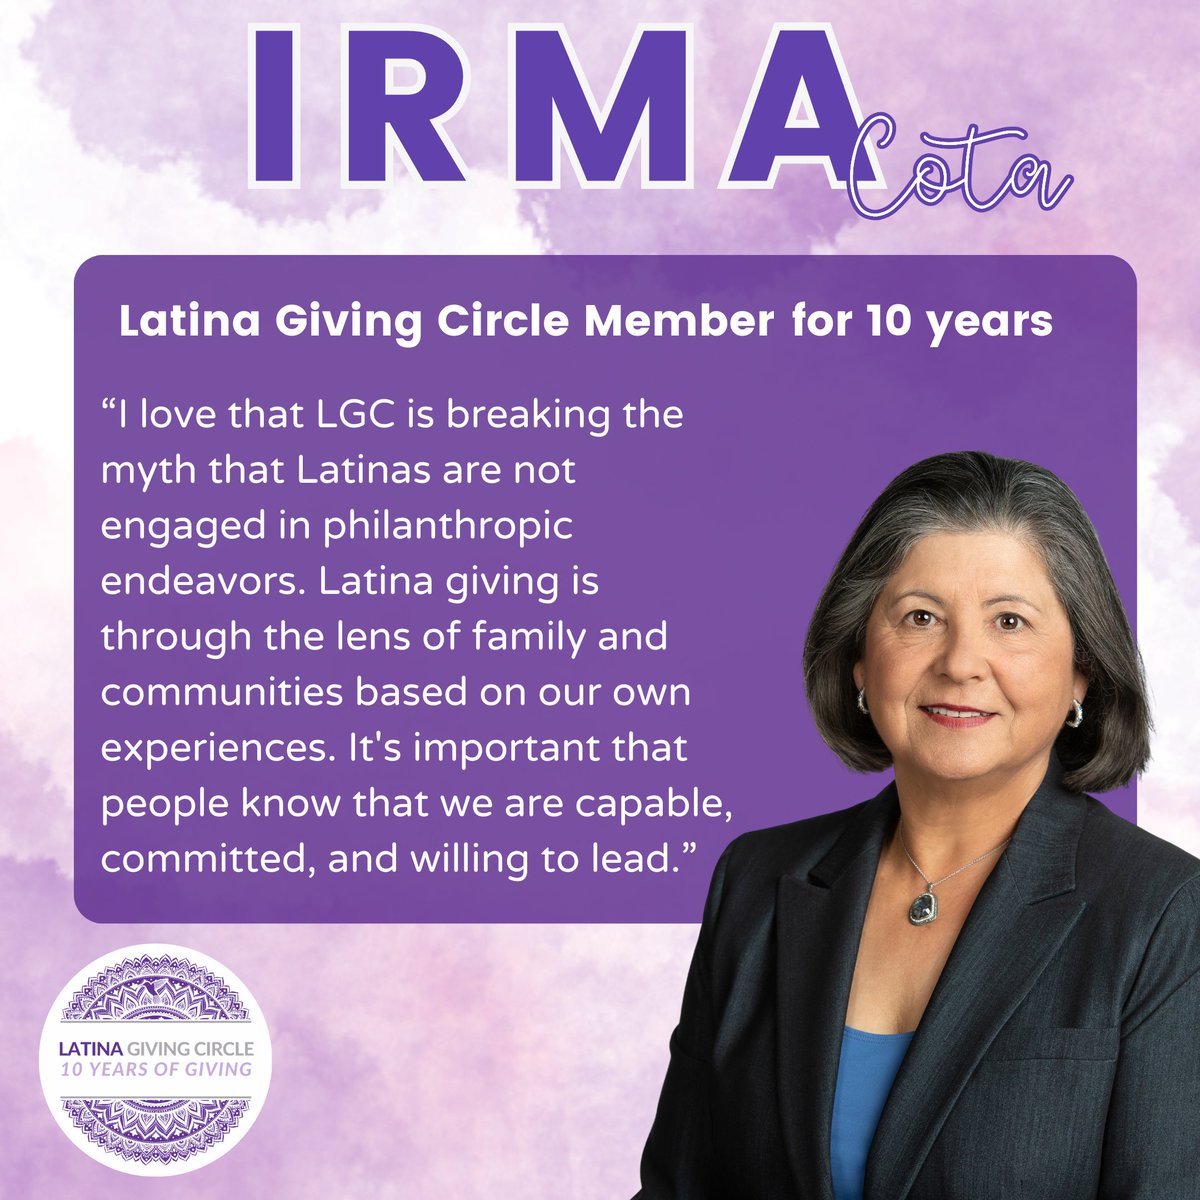 March is Women's History Month and to celebrate, we will be highlighting the work of inspiring Latinas throughout the month. First up - Irma Cota, who has been a member of LGC since its inception. Learn more about her in our newsletter!